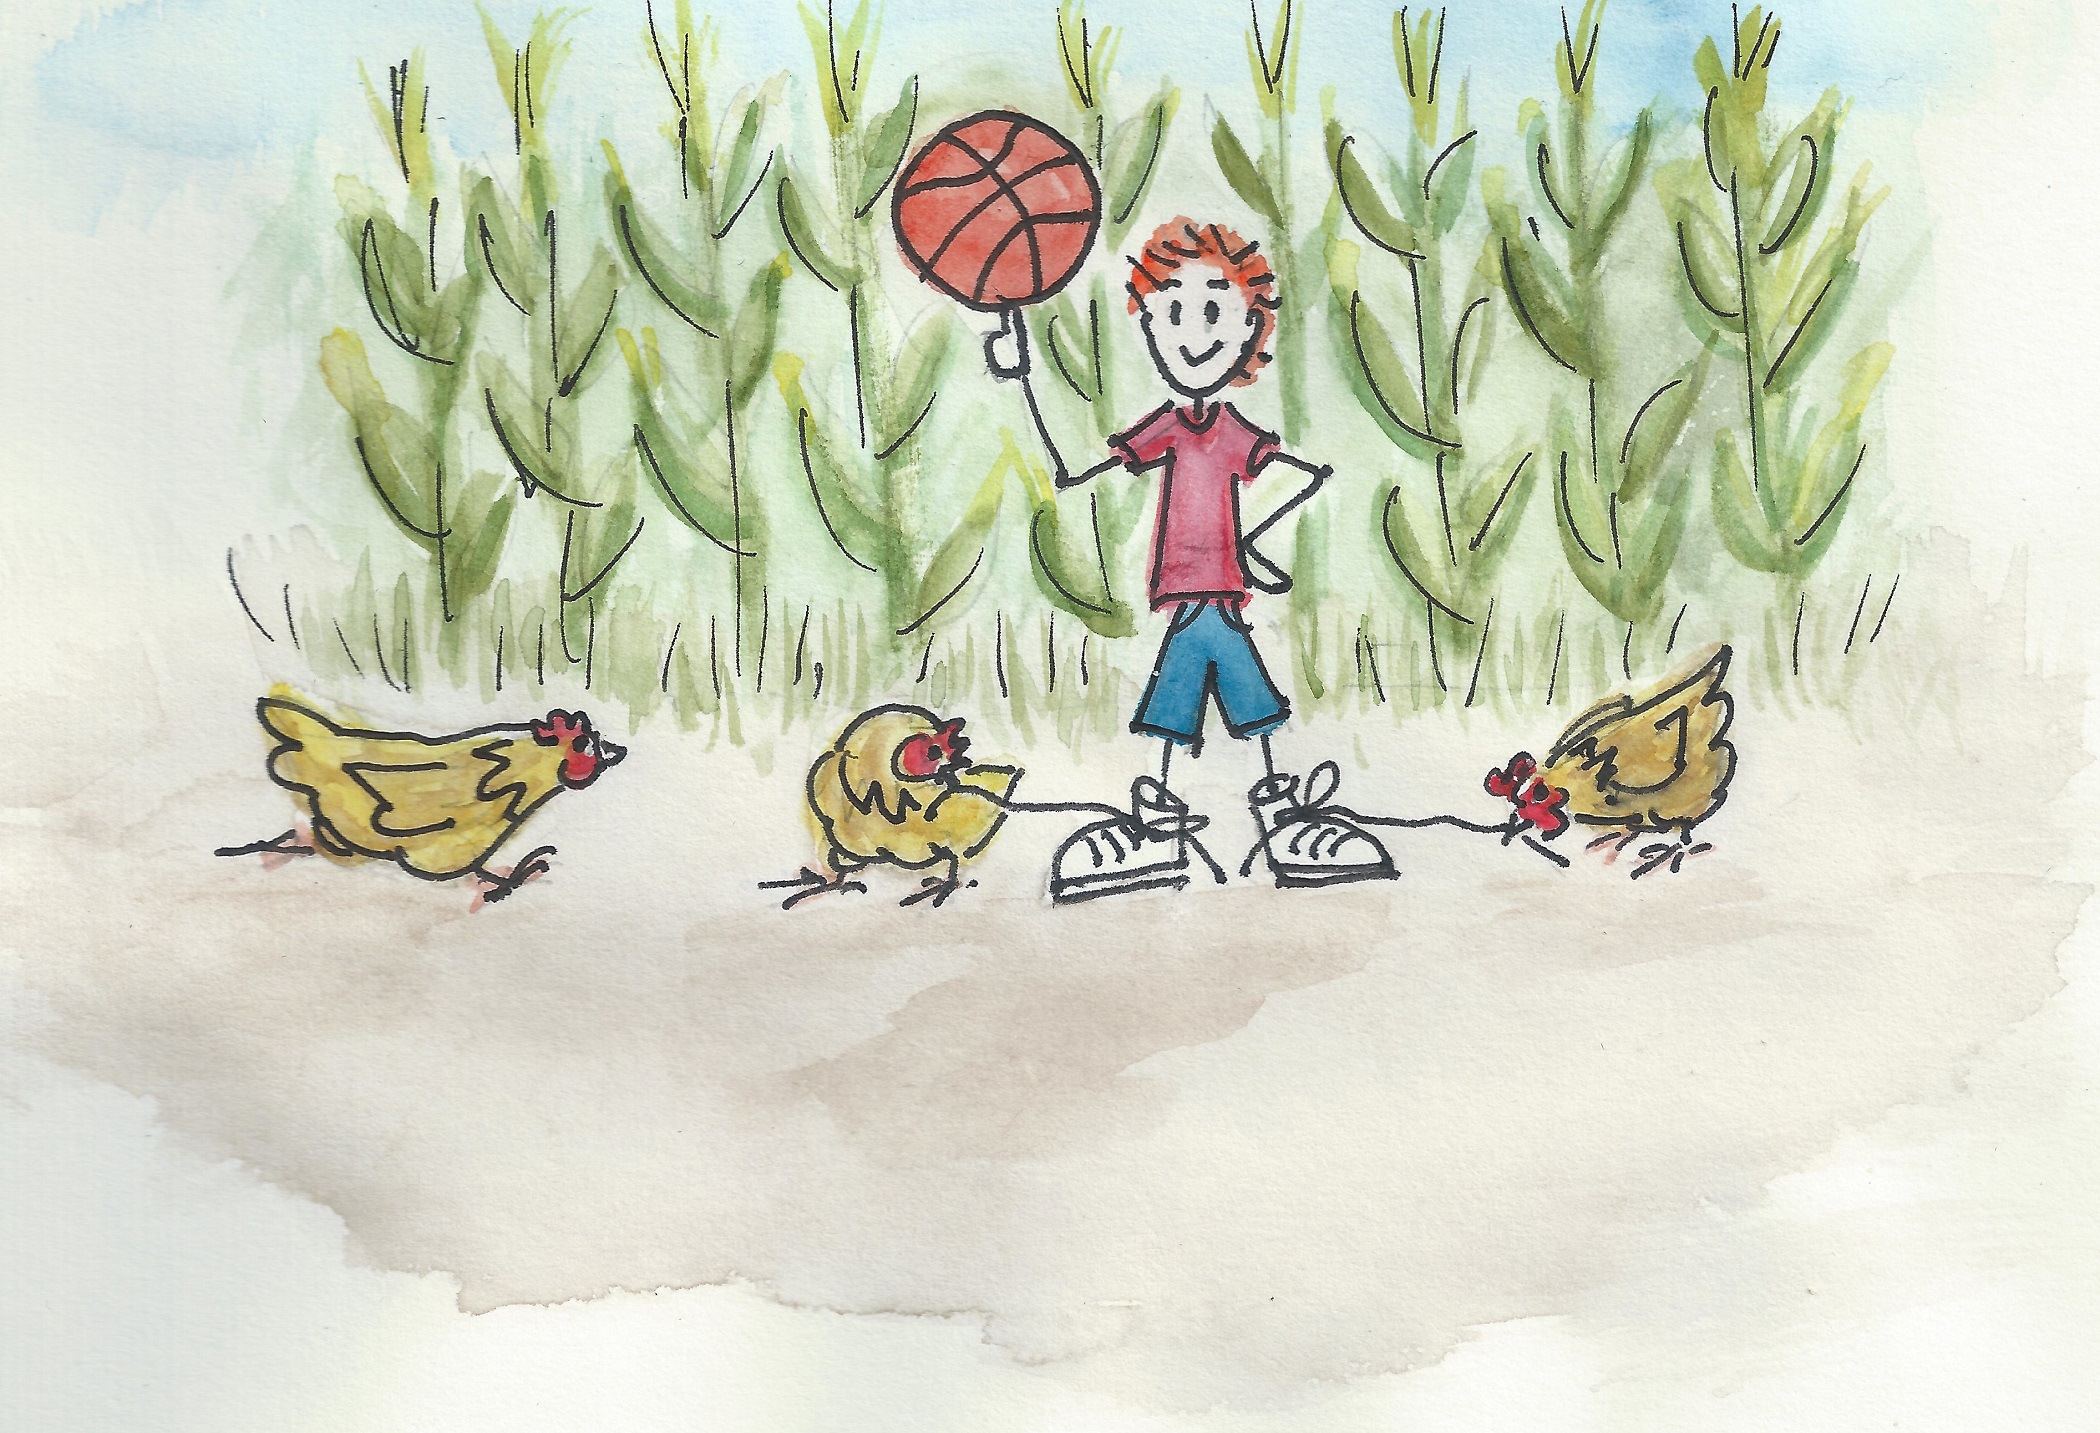 James and chickens